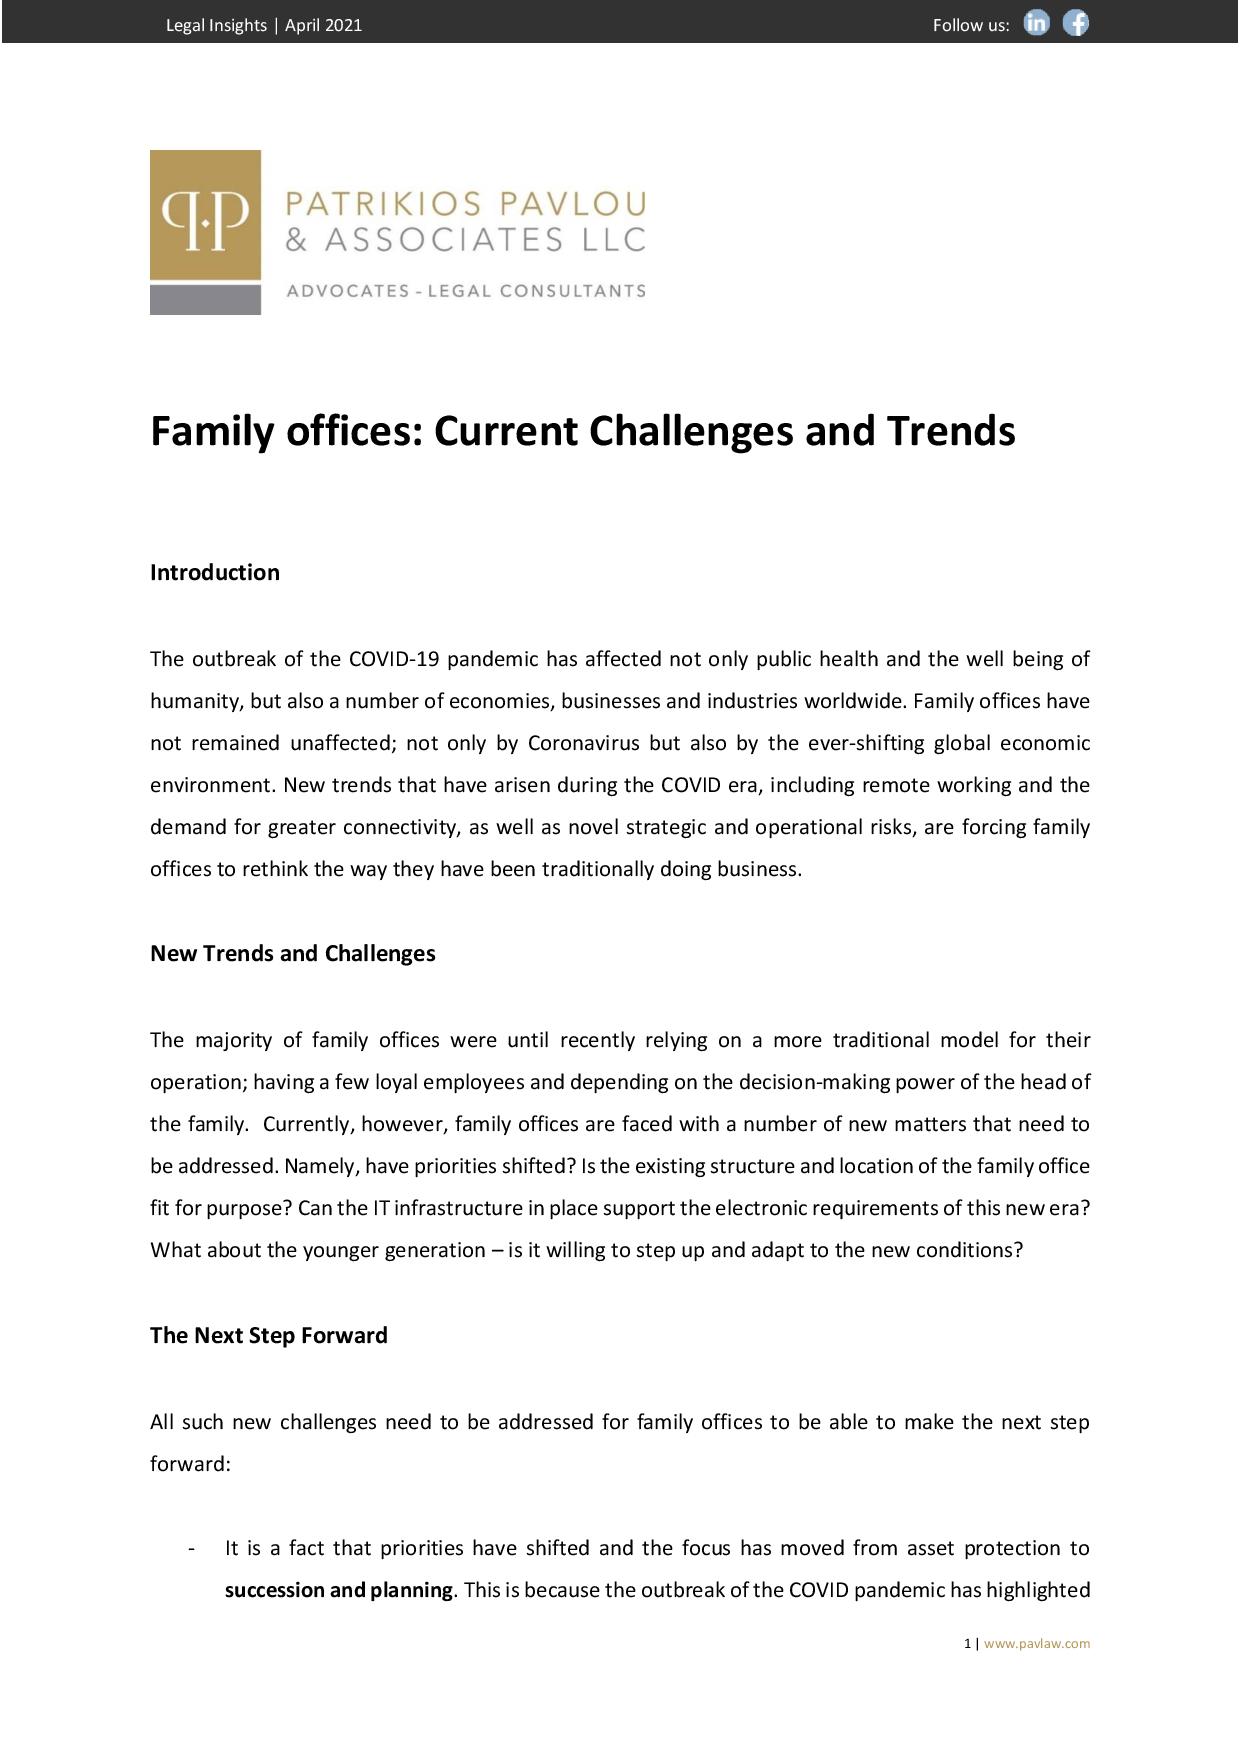 Patrikios Pavlou & Associates LLC: Family Offices: Current Challenges and Trends